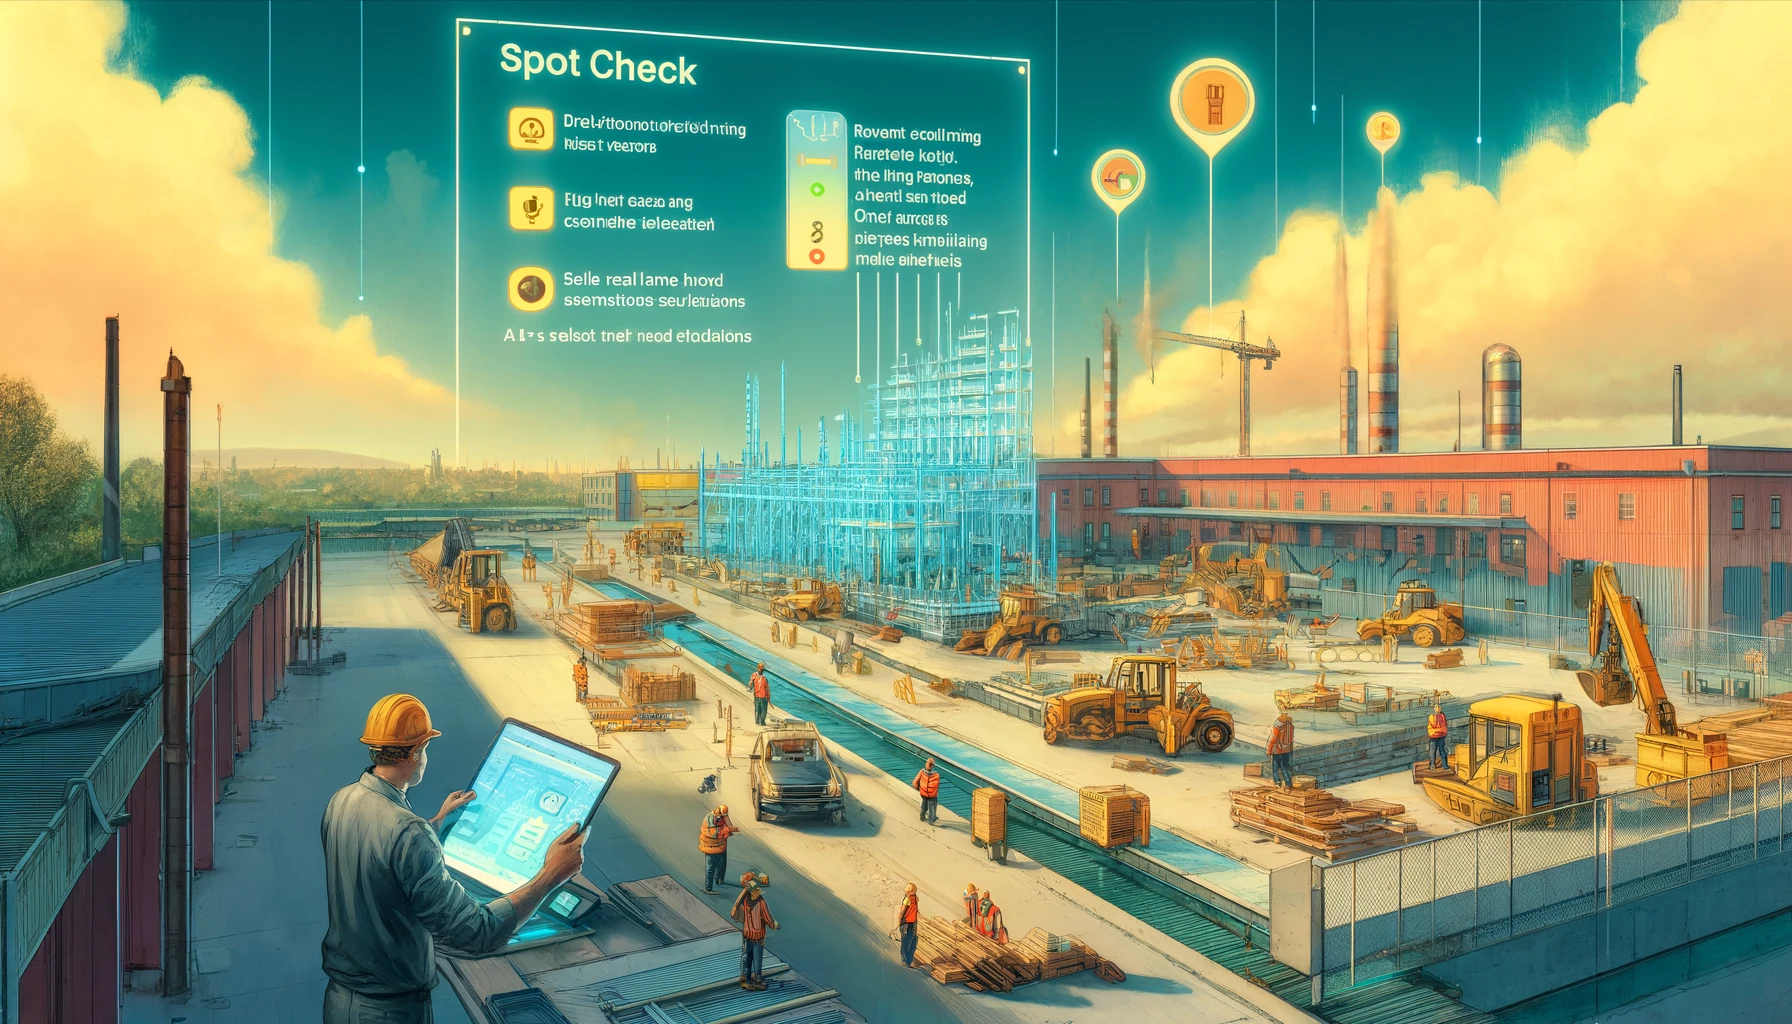 illustration for the article, focusing on the AI solution's impact on a construction site. It highlights the 'Spot Check' feature and the use of real-time data for improved project management and communication among workers.